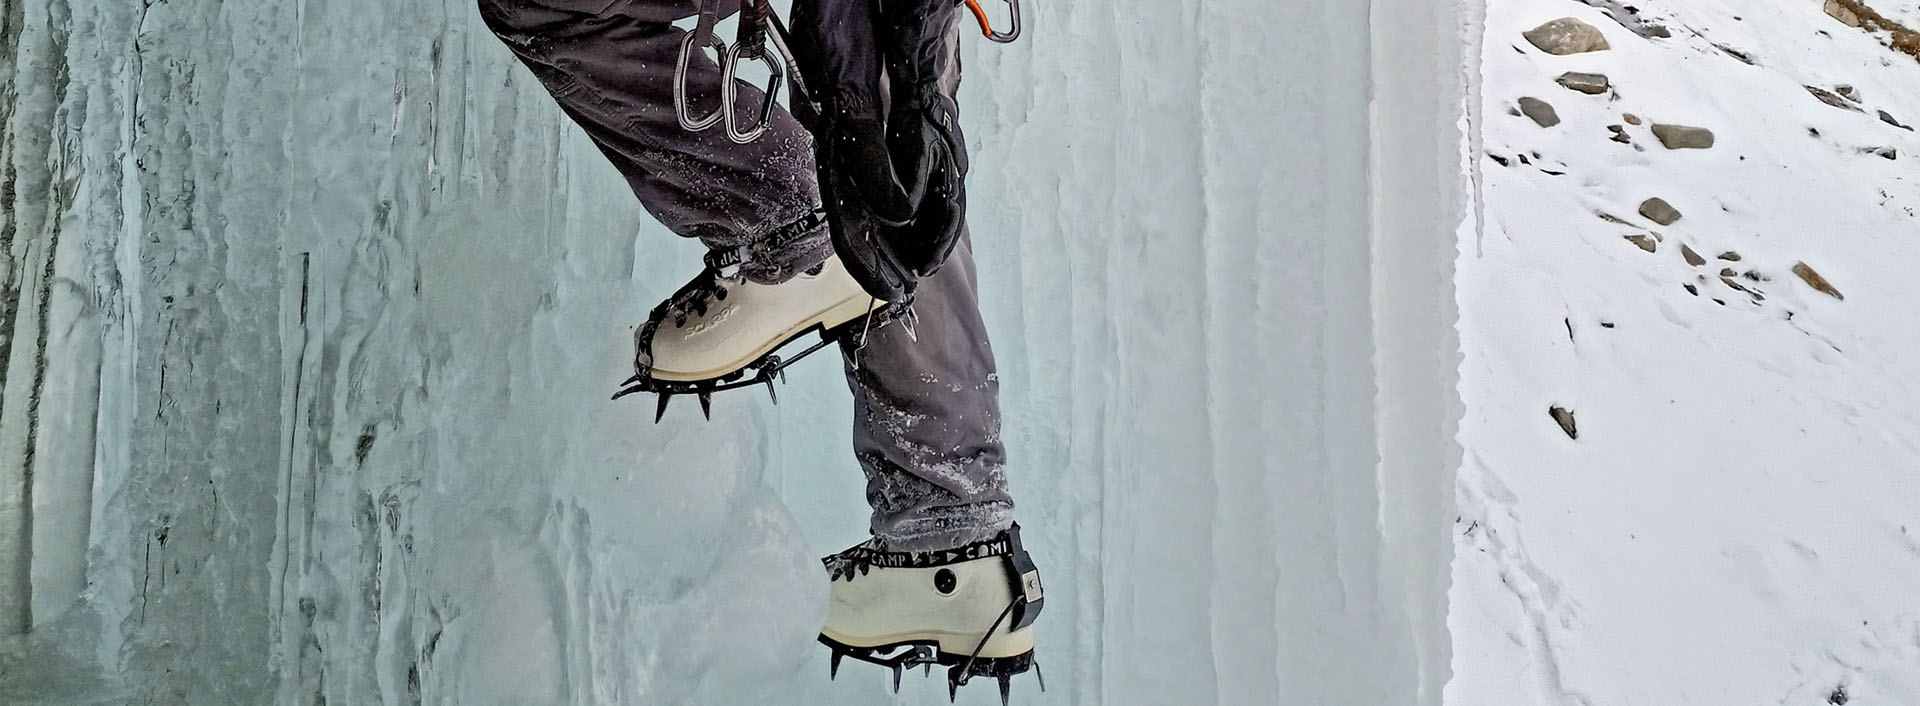 During an ice climbing course, using front-pointing cramponing technique.